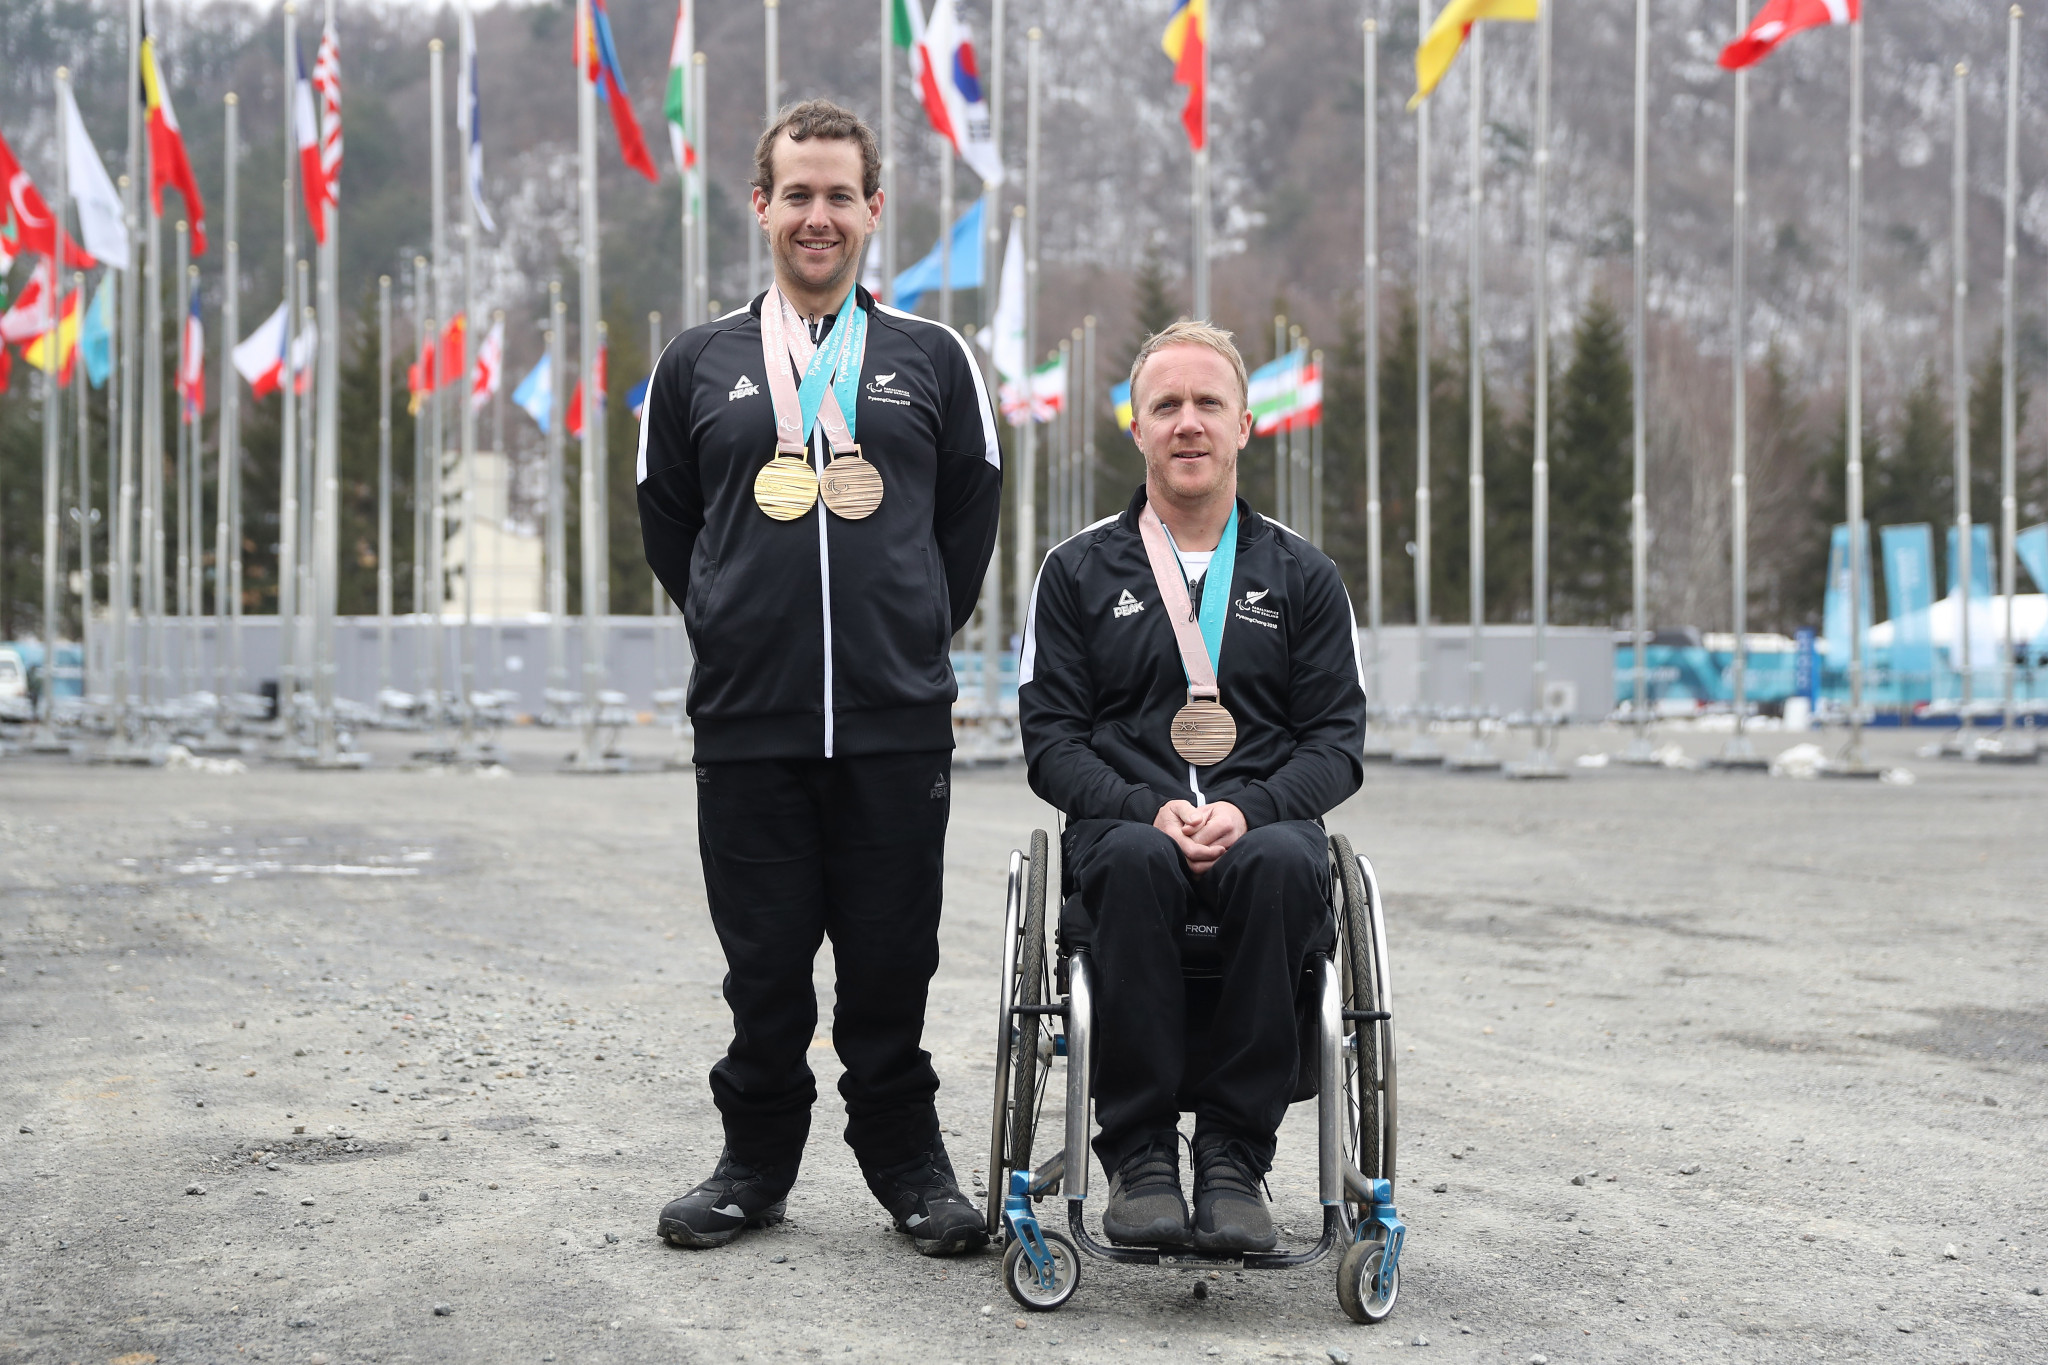 New Zealand medallists Adam Hall and Corey Peters pose at the Athletes' Village ©Getty Images